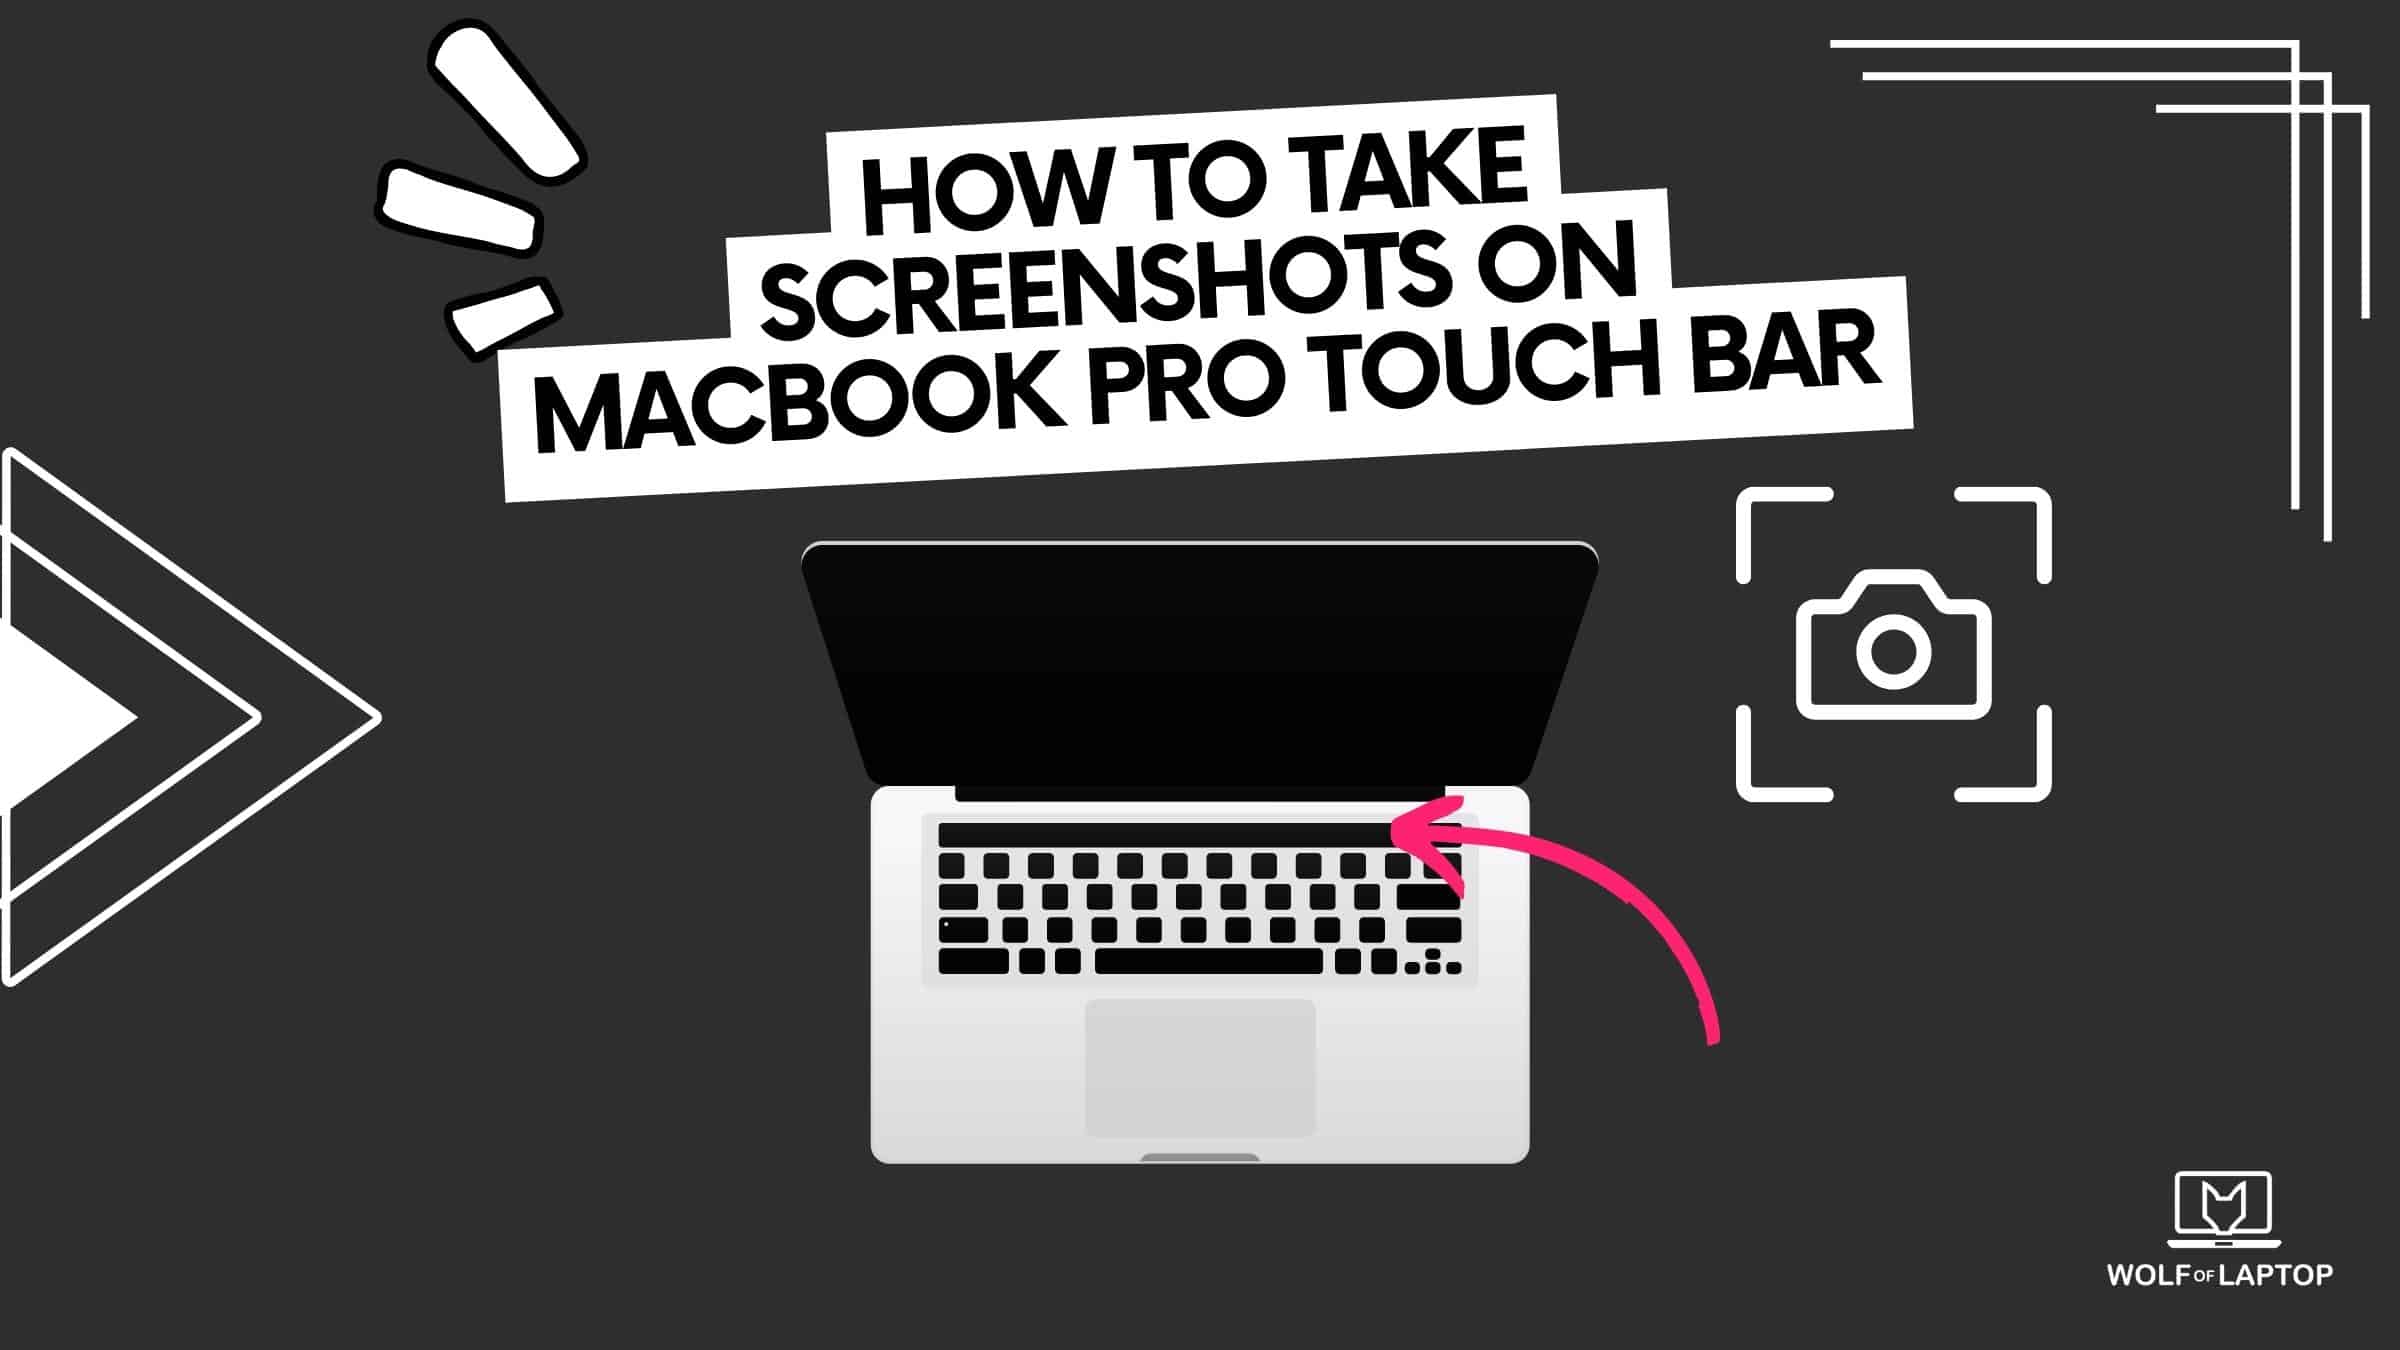 How To Take Screenshots on Macbook Pro Touch Bar - quick and easy guide